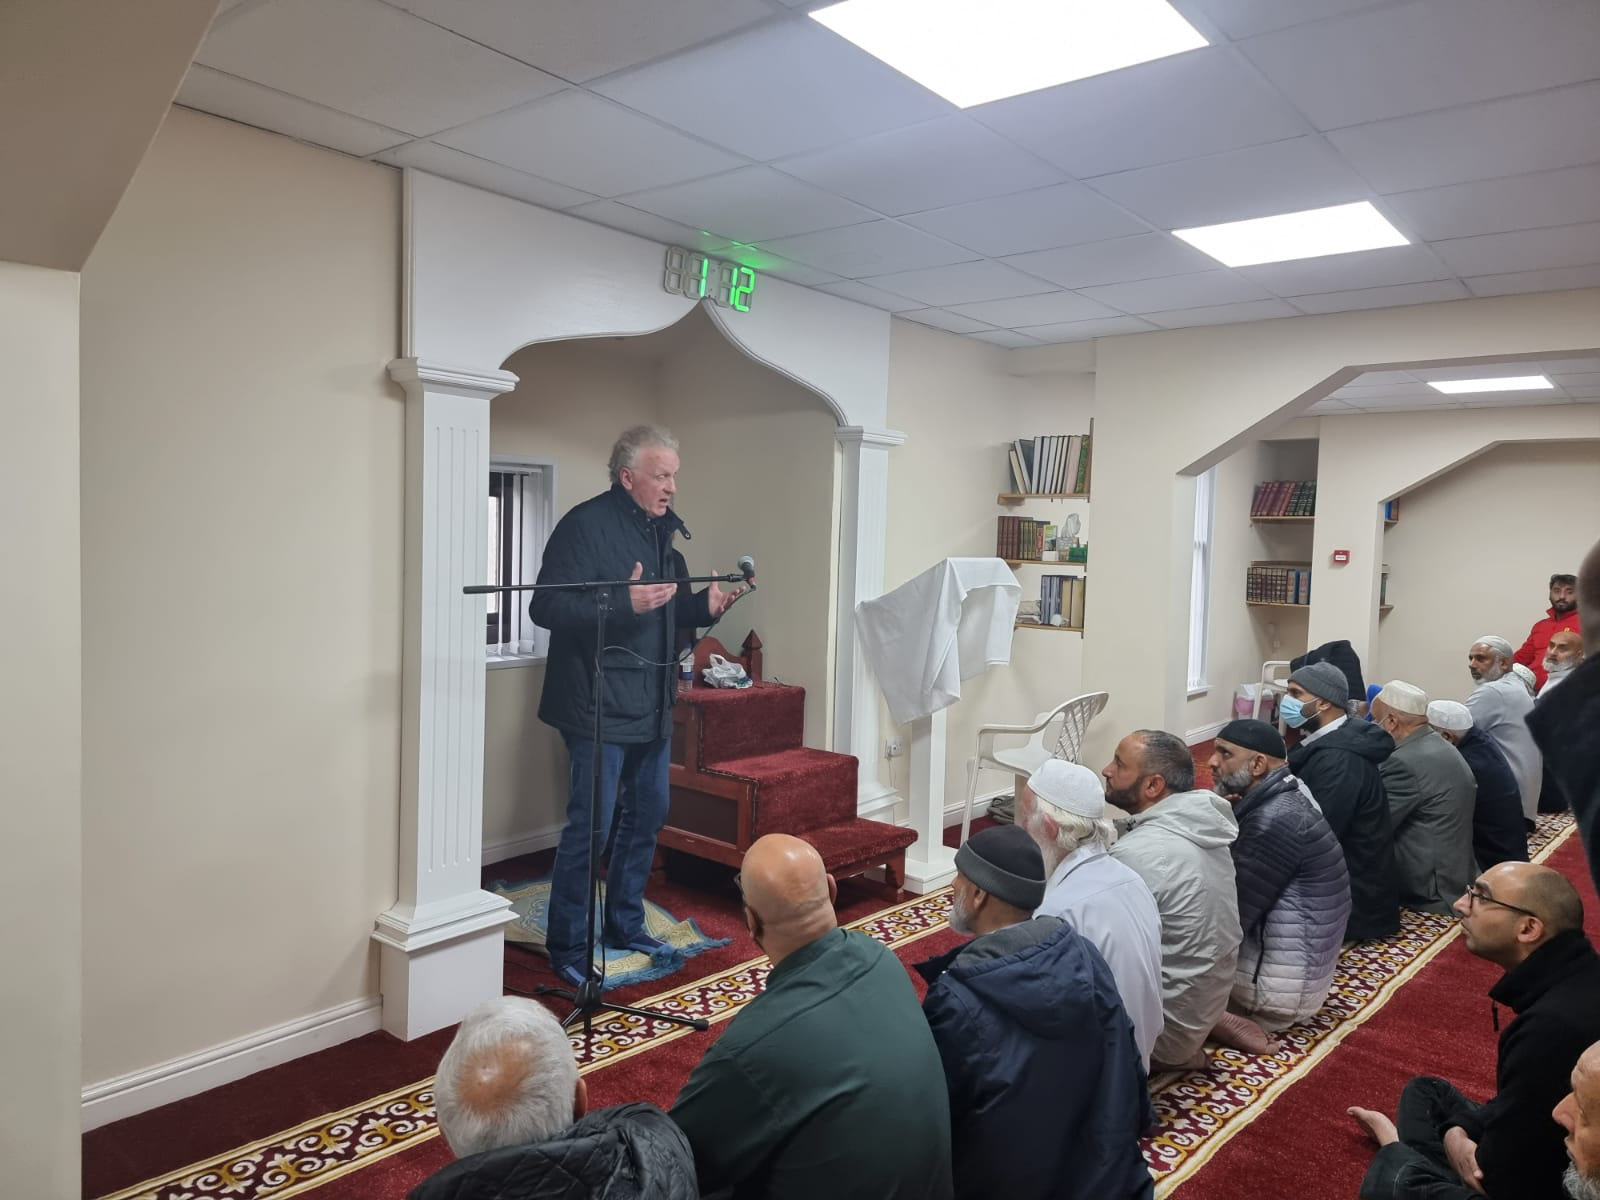 Following joining in Friday prayers at Skipton Mosque, Keith Tordoffwas honoured to be invited by the Imam to address the worshippers about how if elected I would work with them. I talked about challenging racism and working together to provide opportunities to encourage social cohesion. 